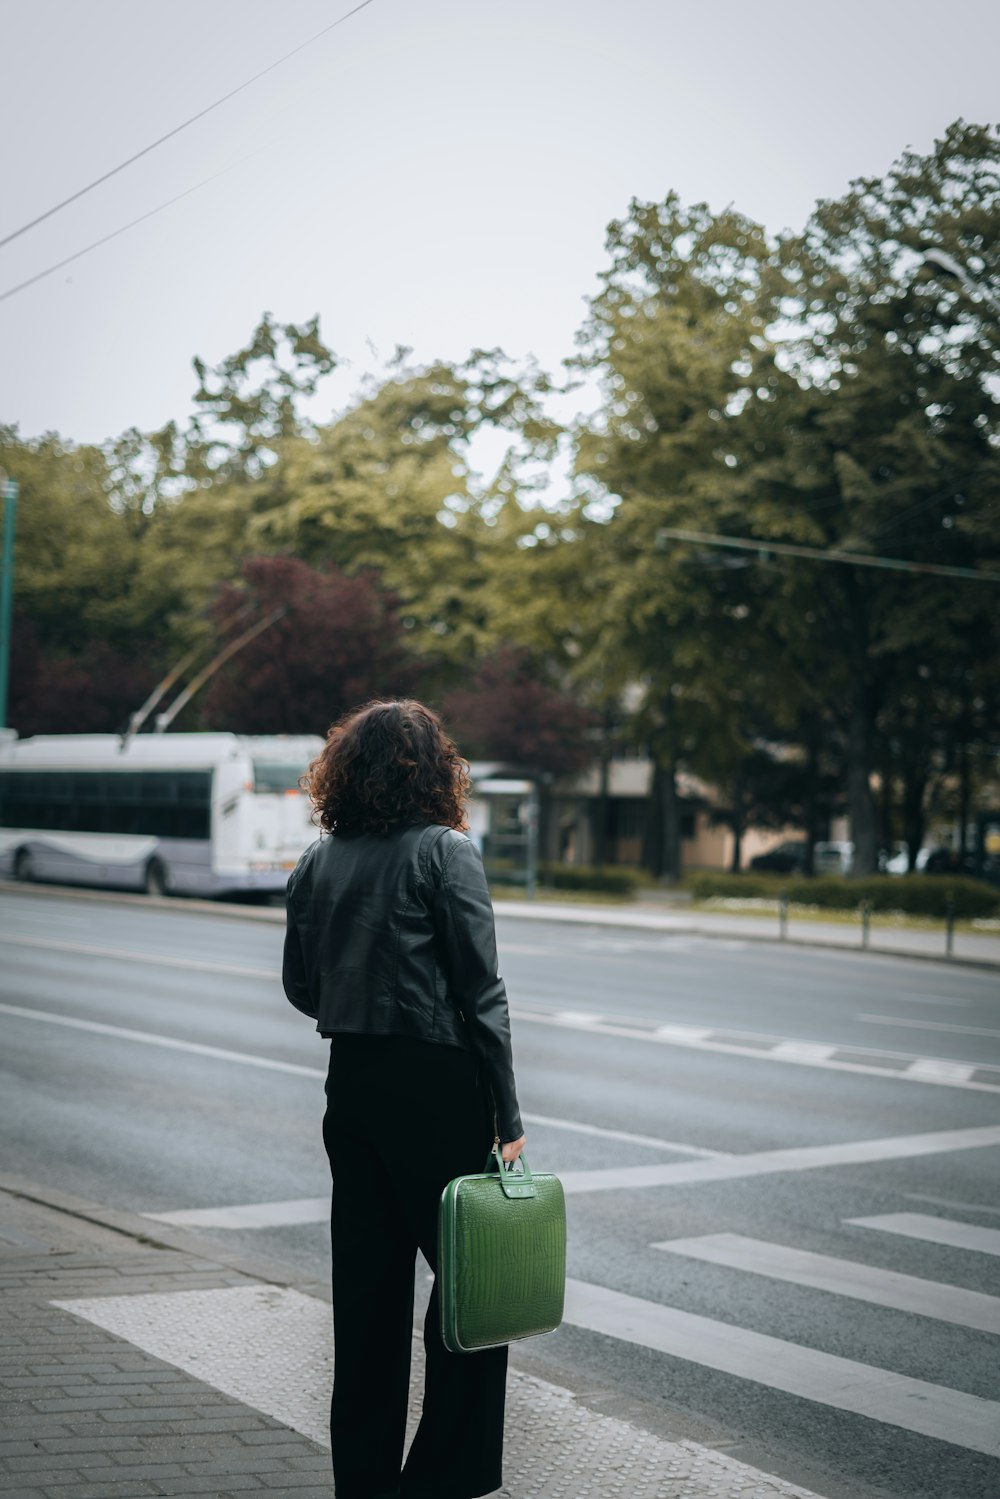 a woman with a green suitcase waiting at a crosswalk